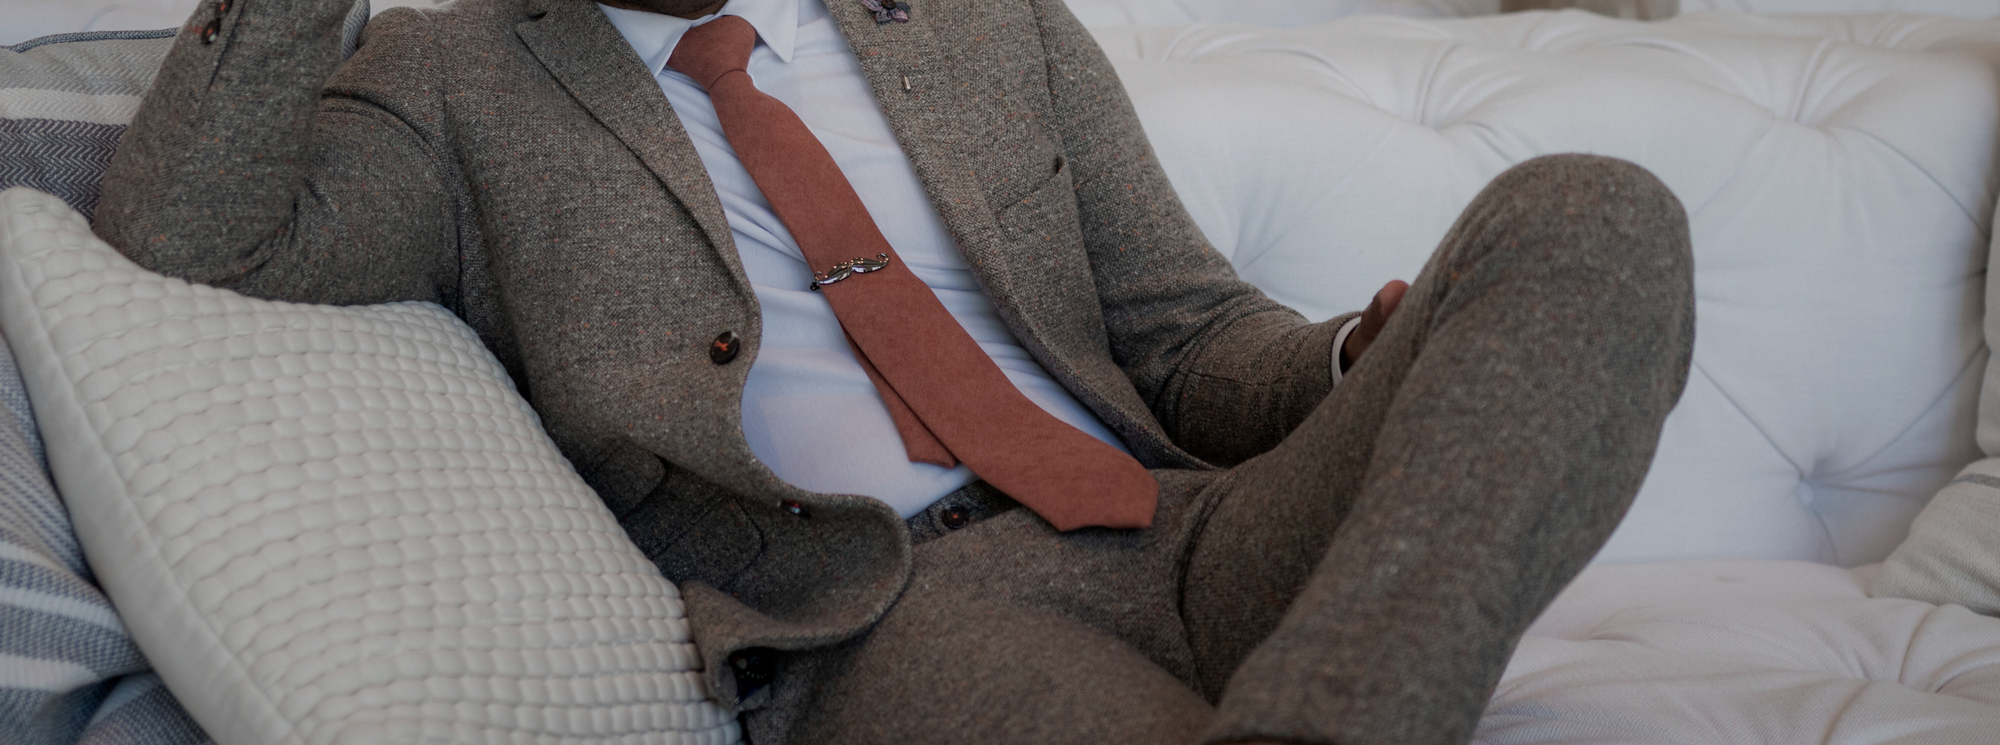 A gentleman sitting on a couch in a brown suit